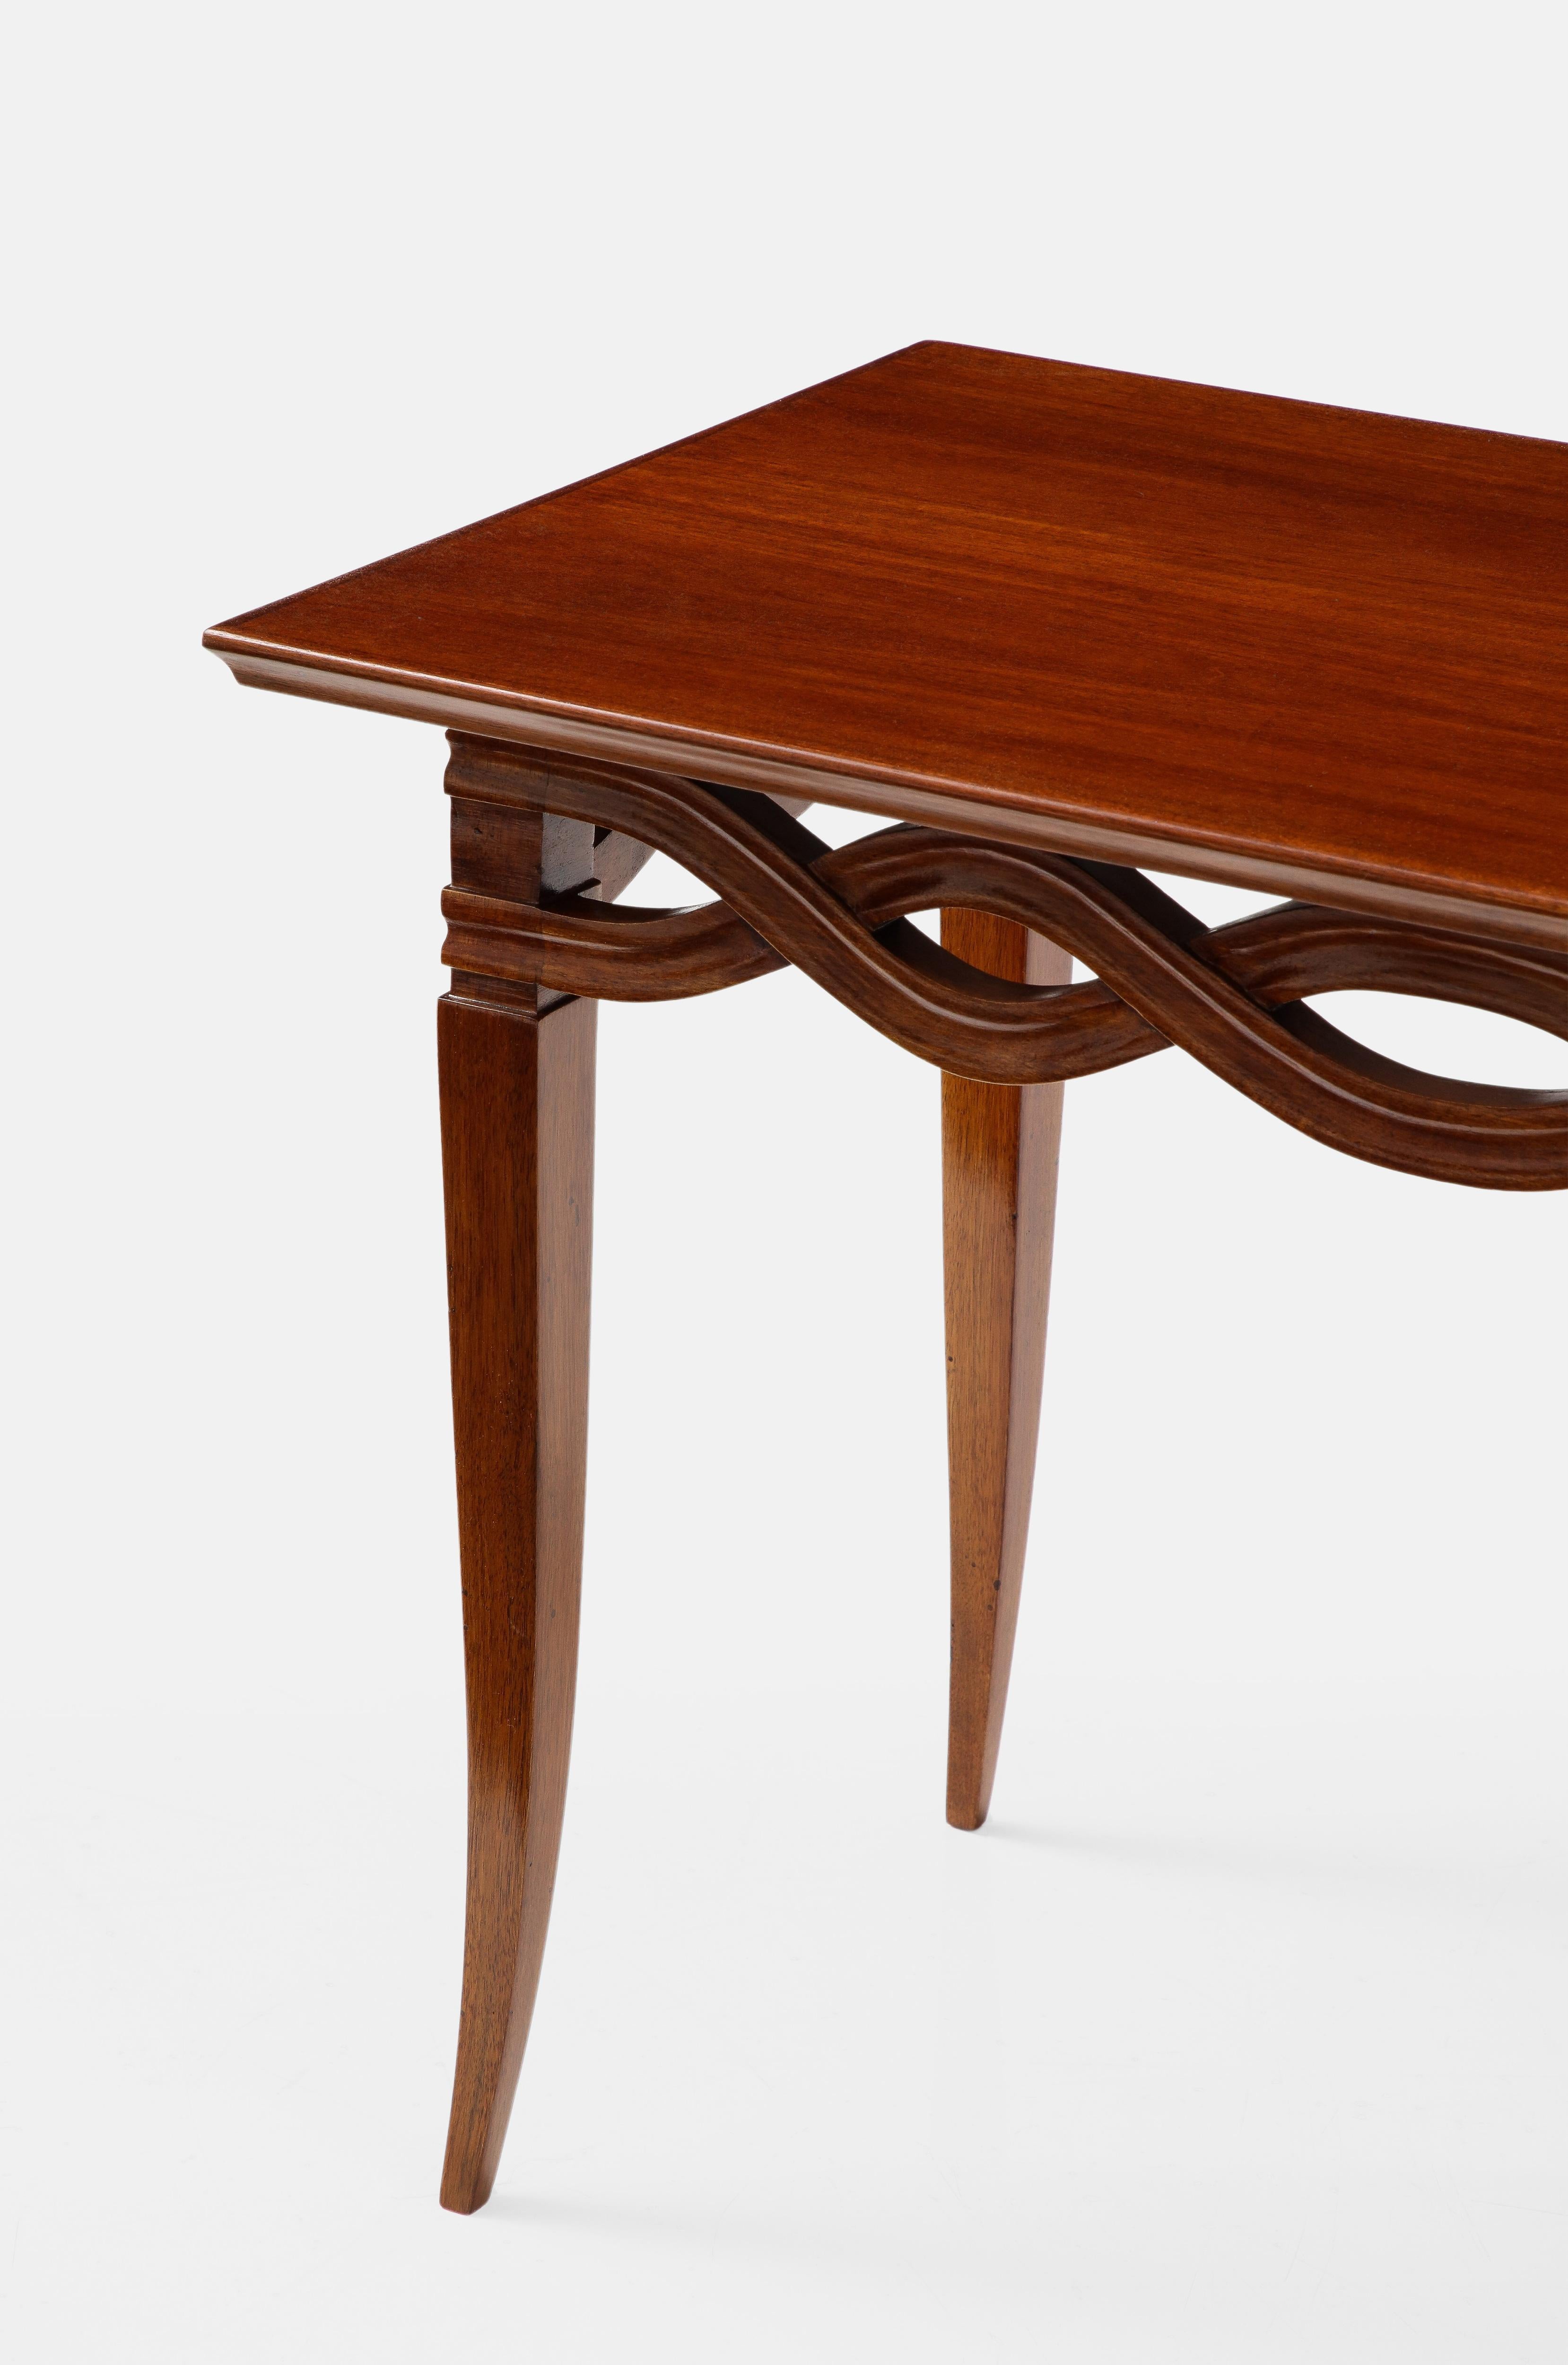 Rare Small Walnut Coffee or Side Table Attributed to Paolo Buffa, Italy, 1940s For Sale 4